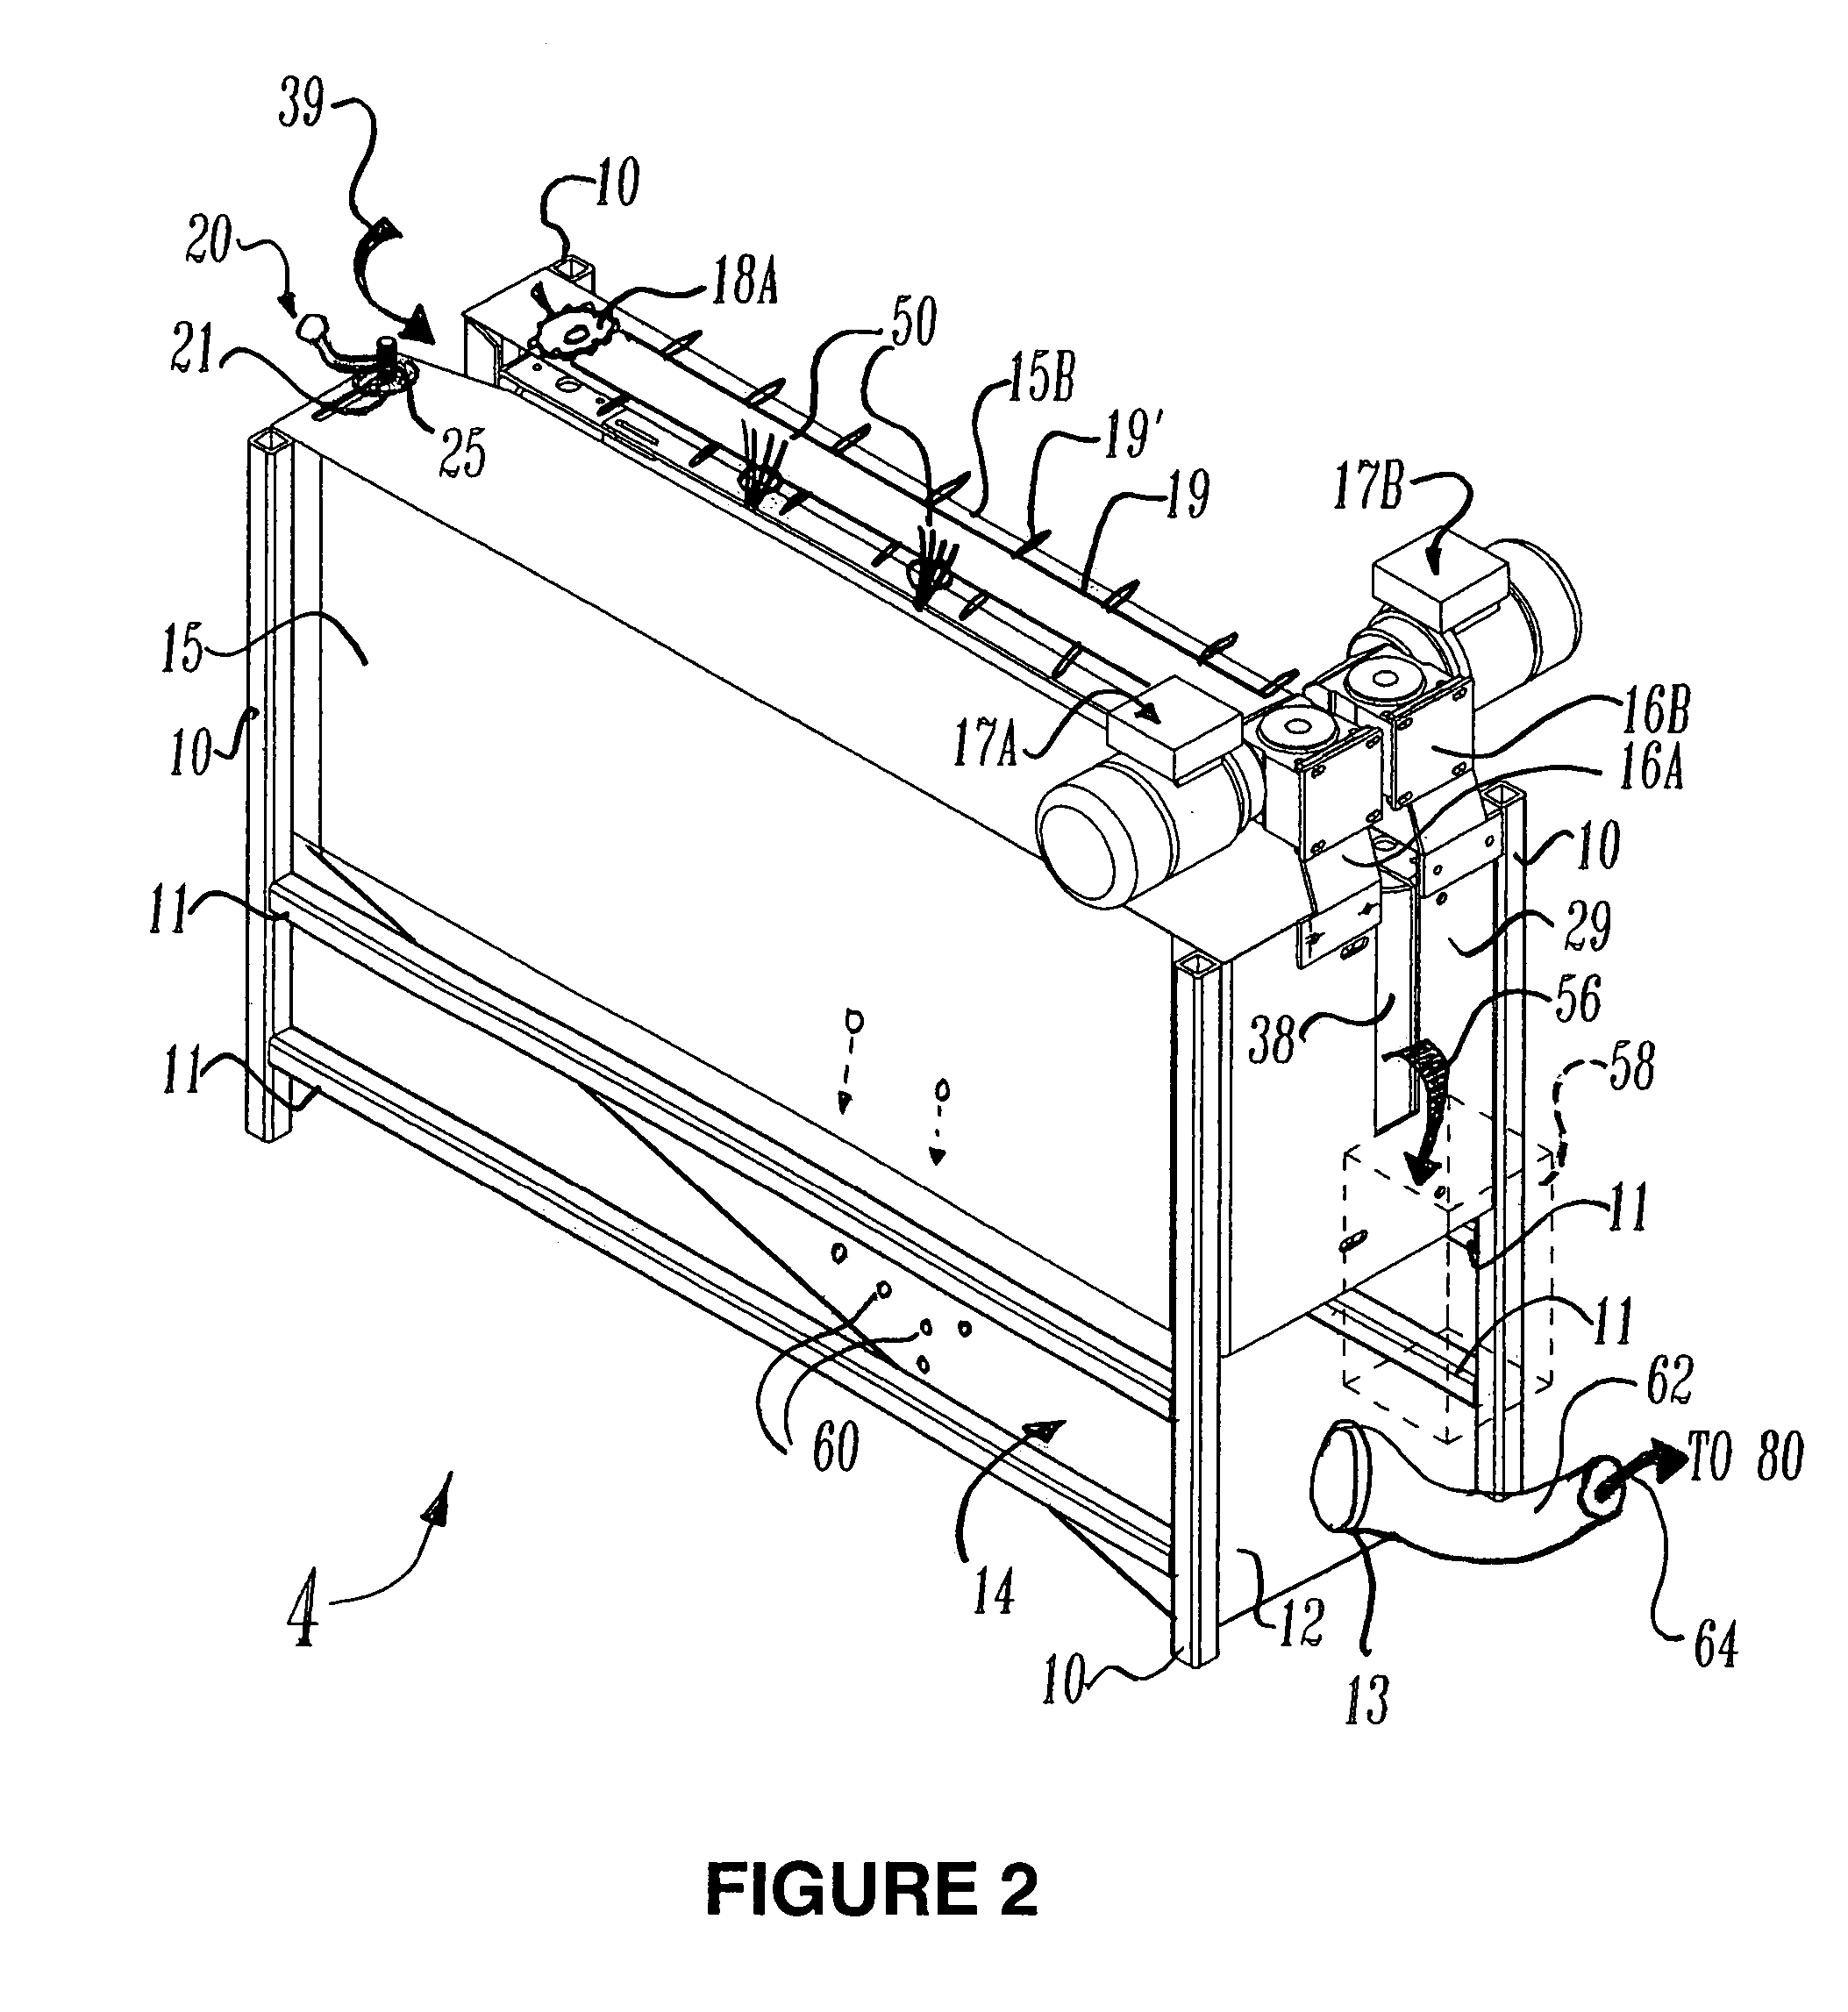 Dried lavender flower separator system and method